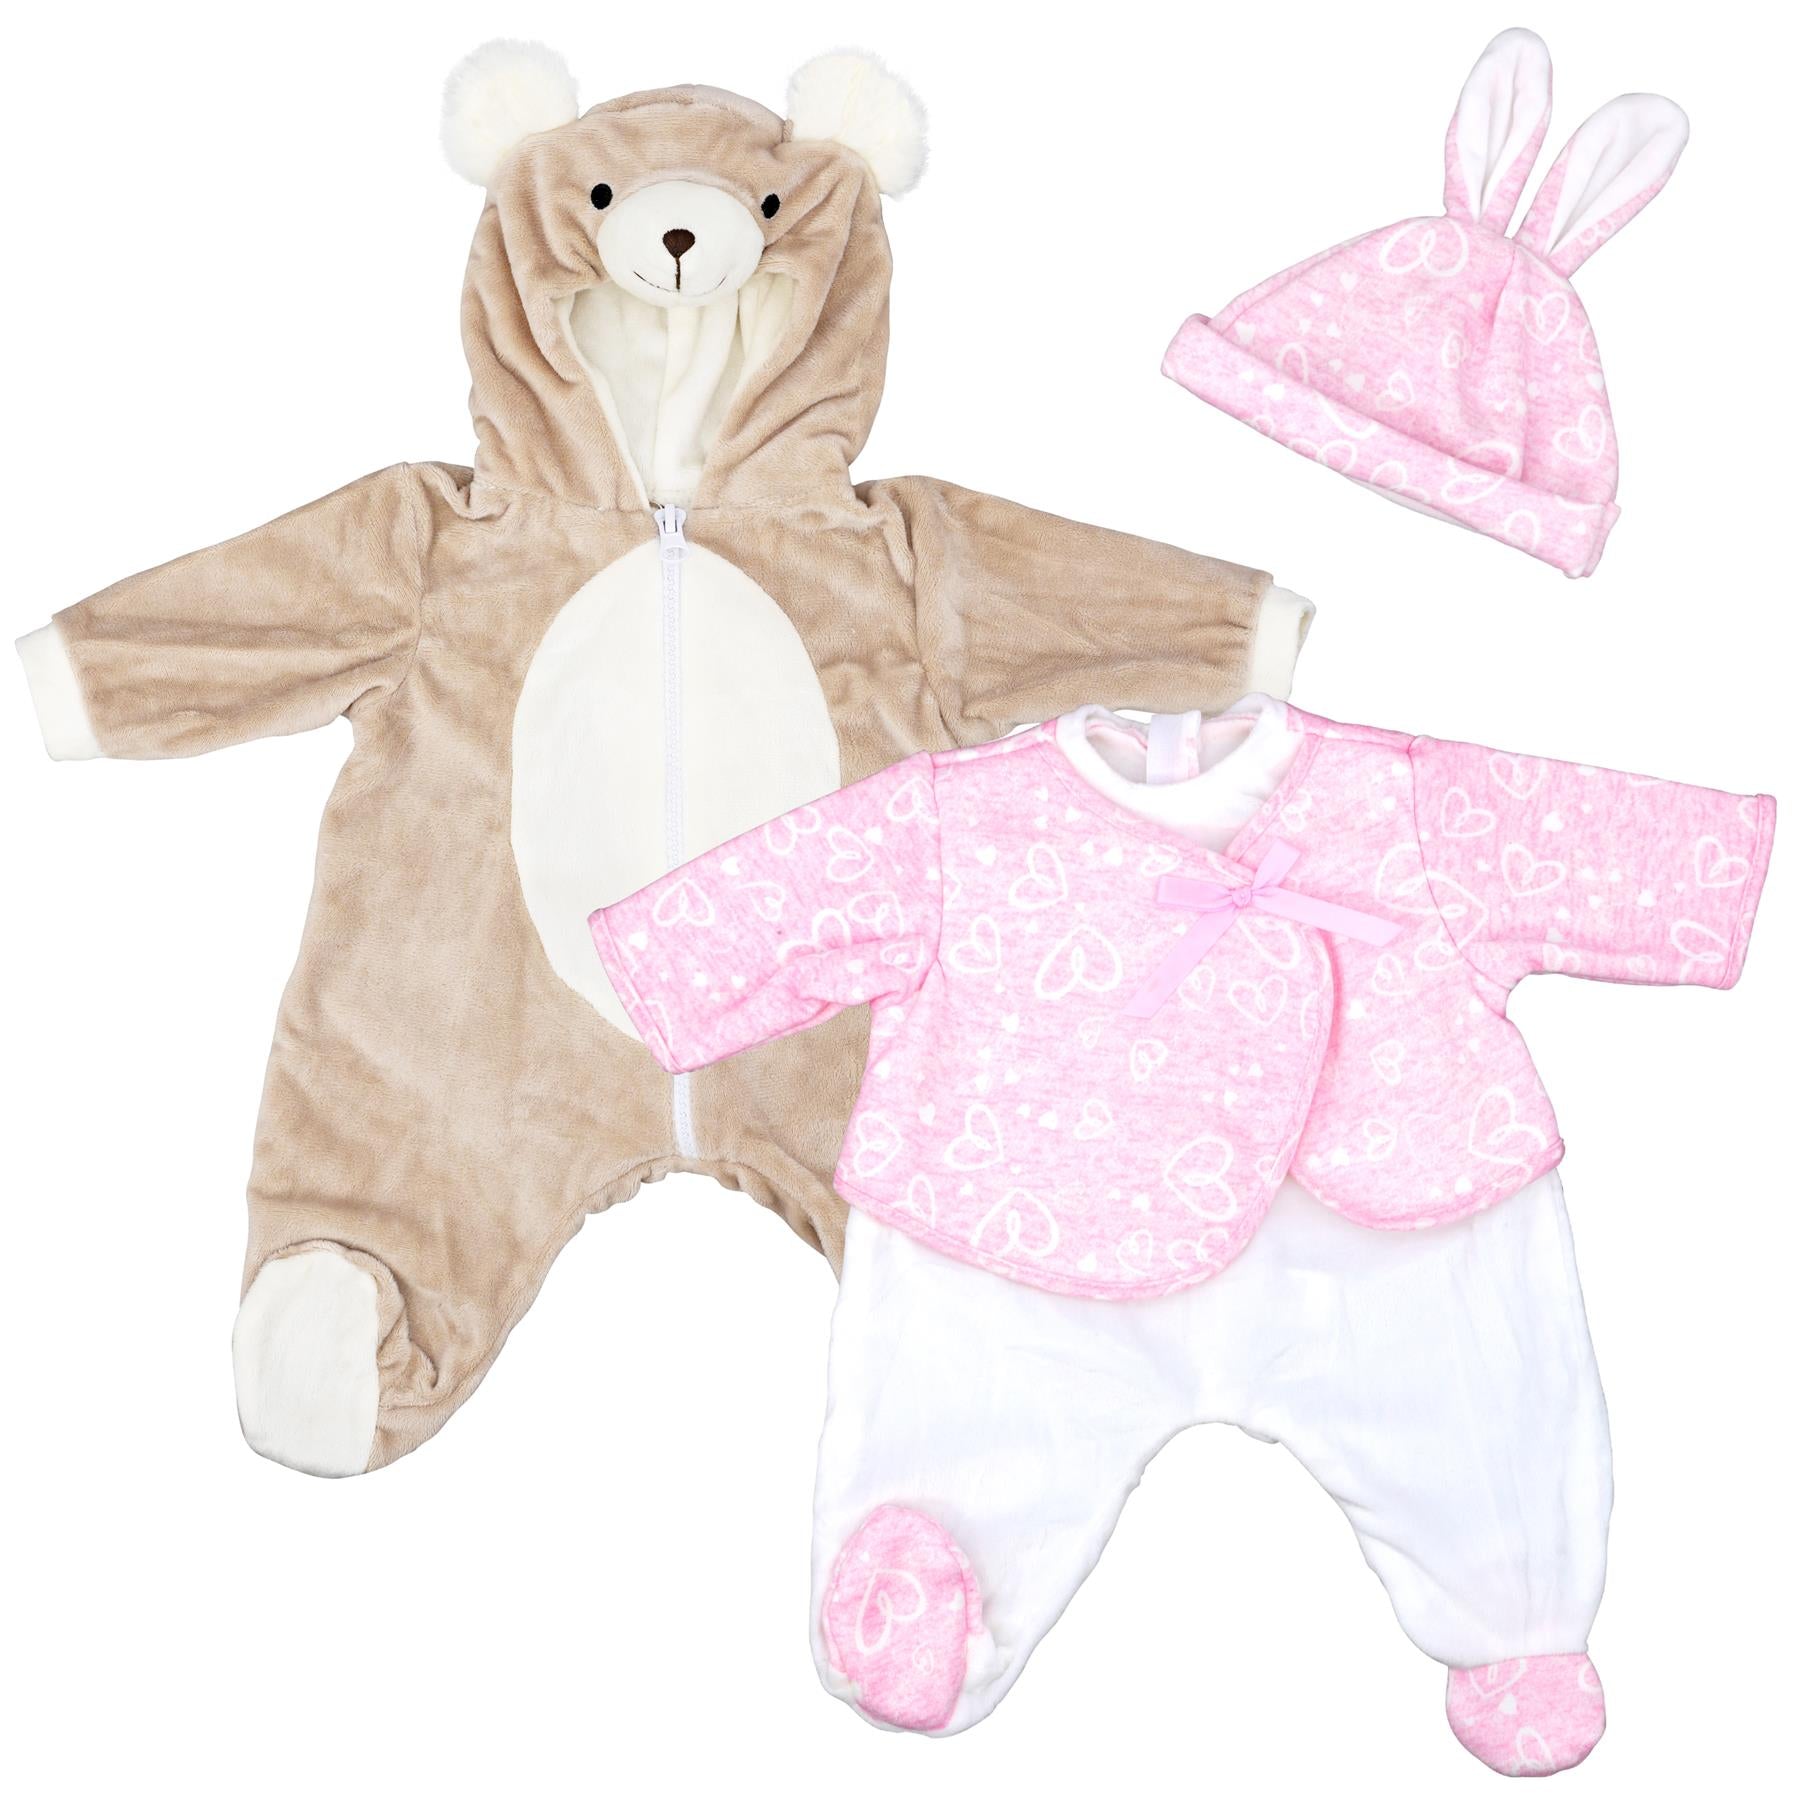 Baby Doll Girl Clothes Set Of Two Outfits Suitable For 20" Baby Doll by BiBi Doll - The Magic Toy Shop